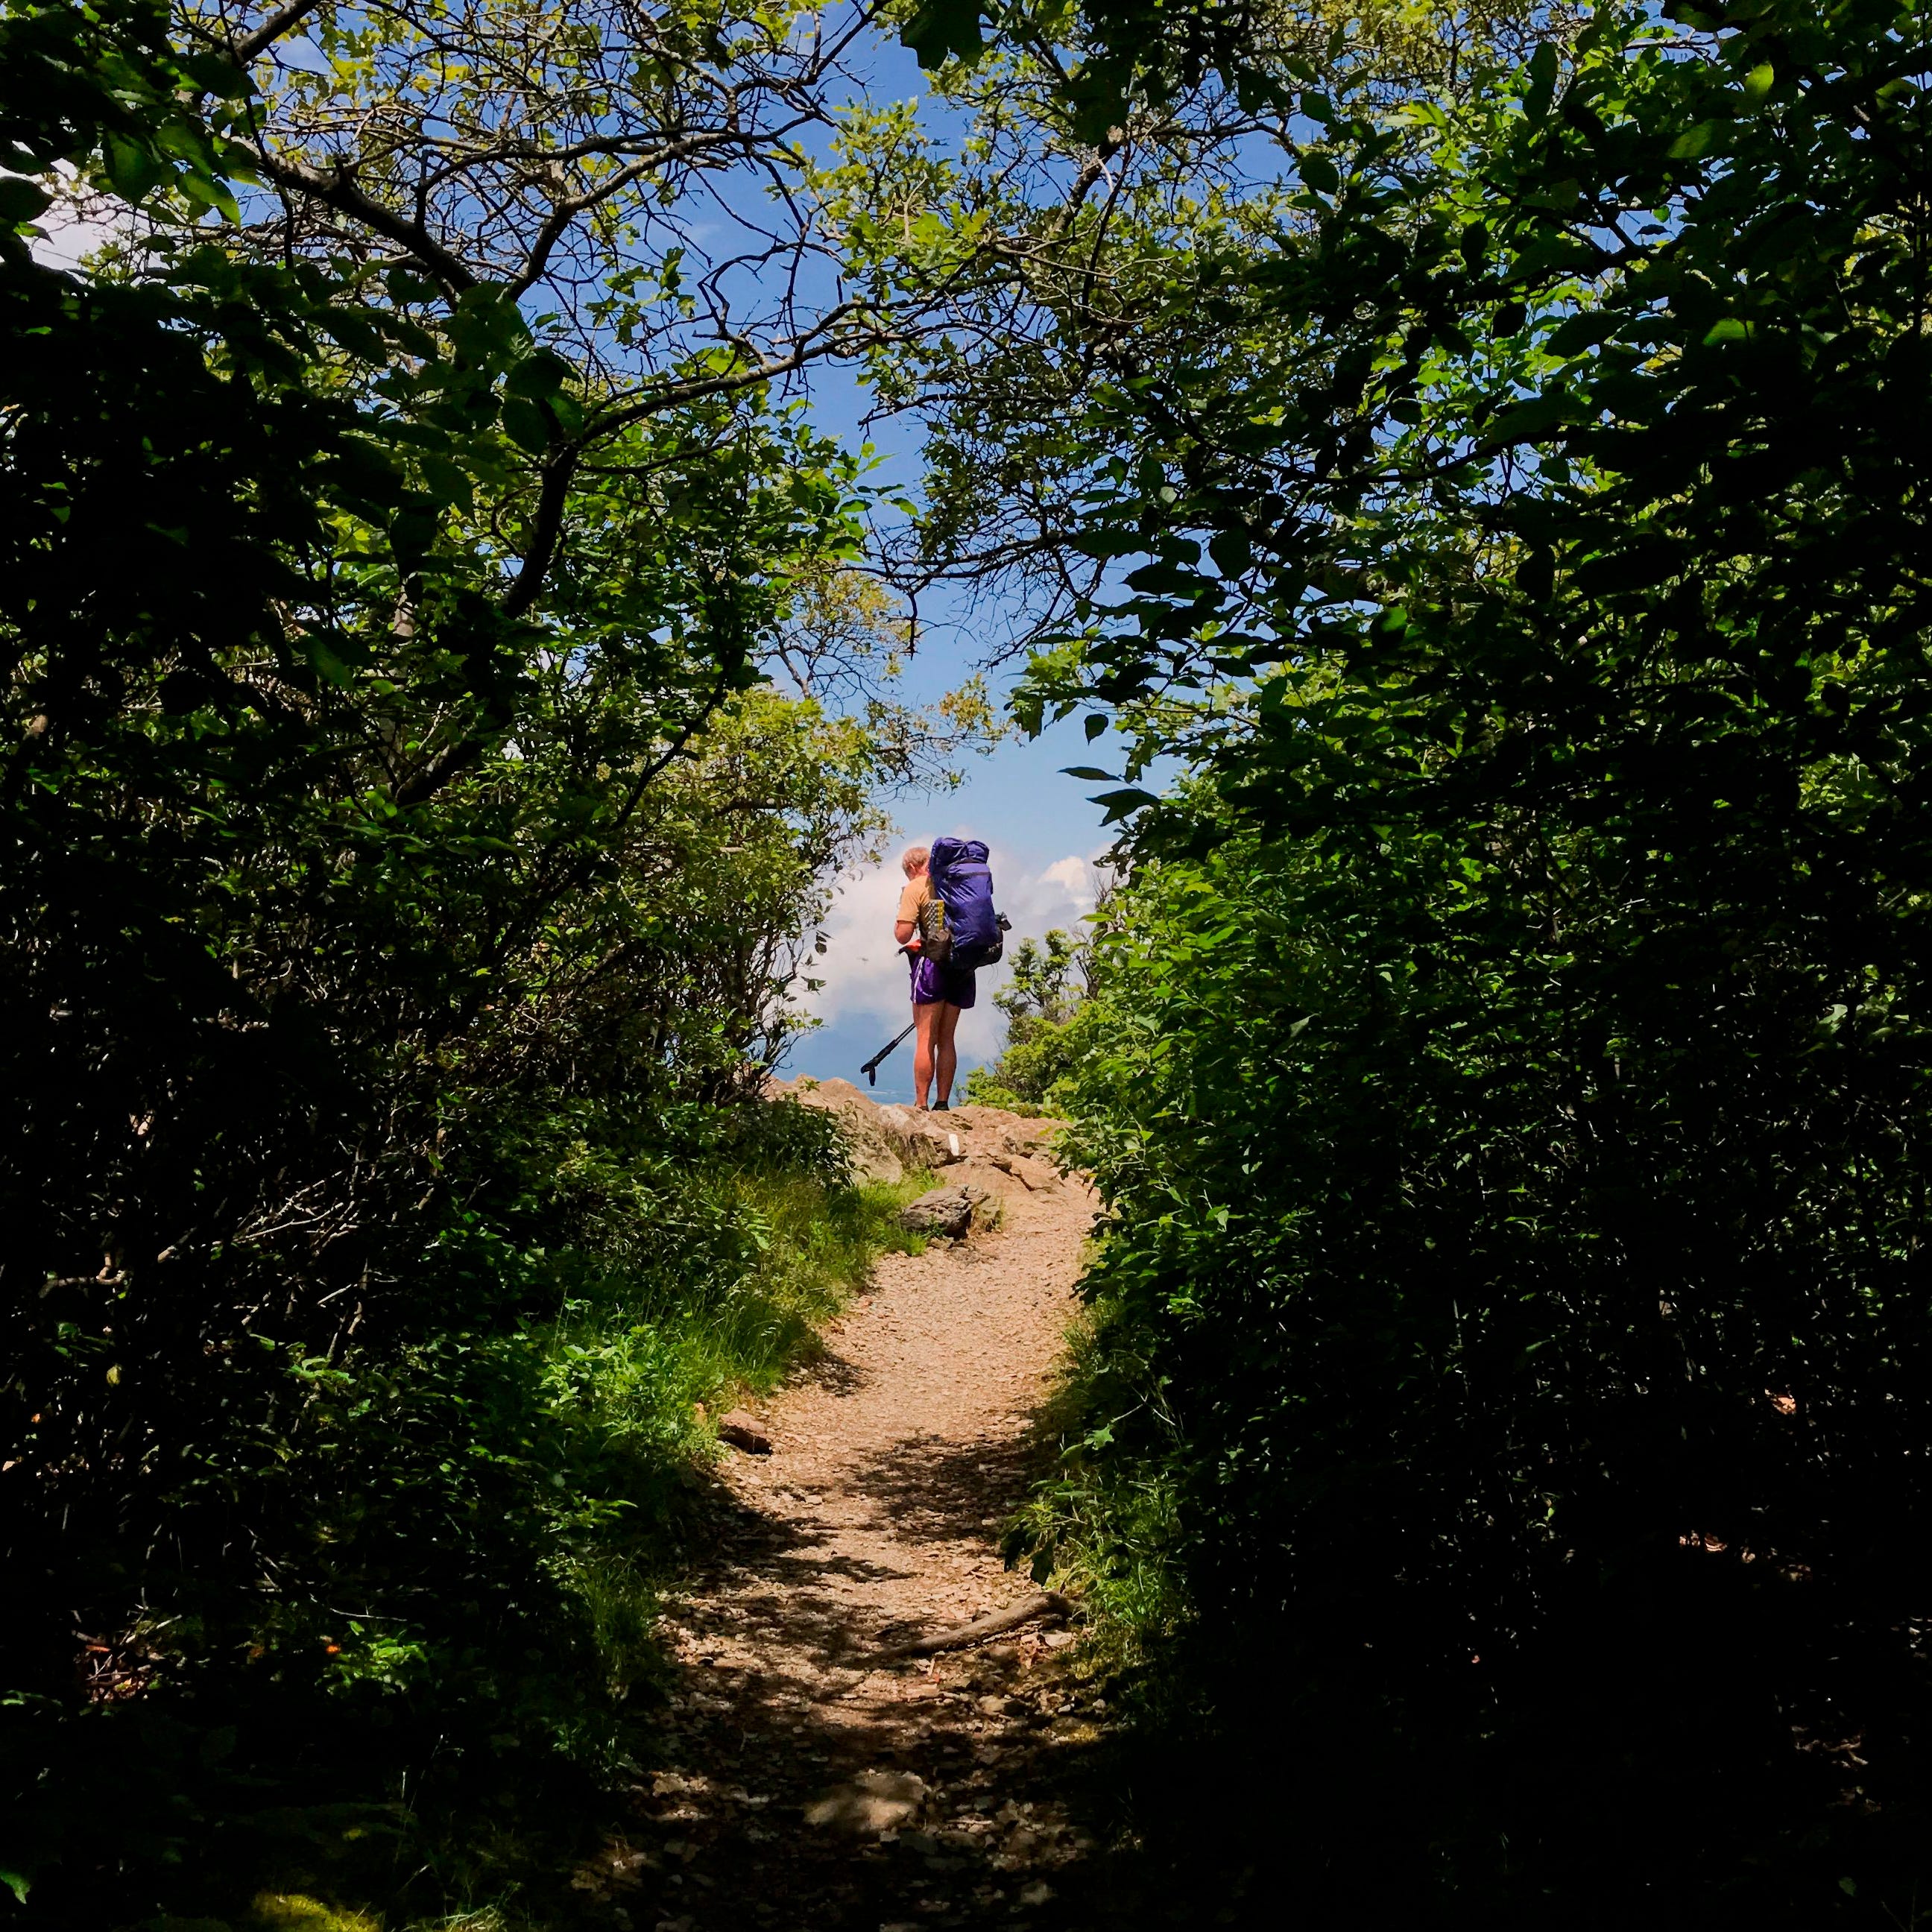 A hiker looks at a map as he walks part of the Appalachian trail in Shenandoah National park, Virginia, on June 13, 2019.